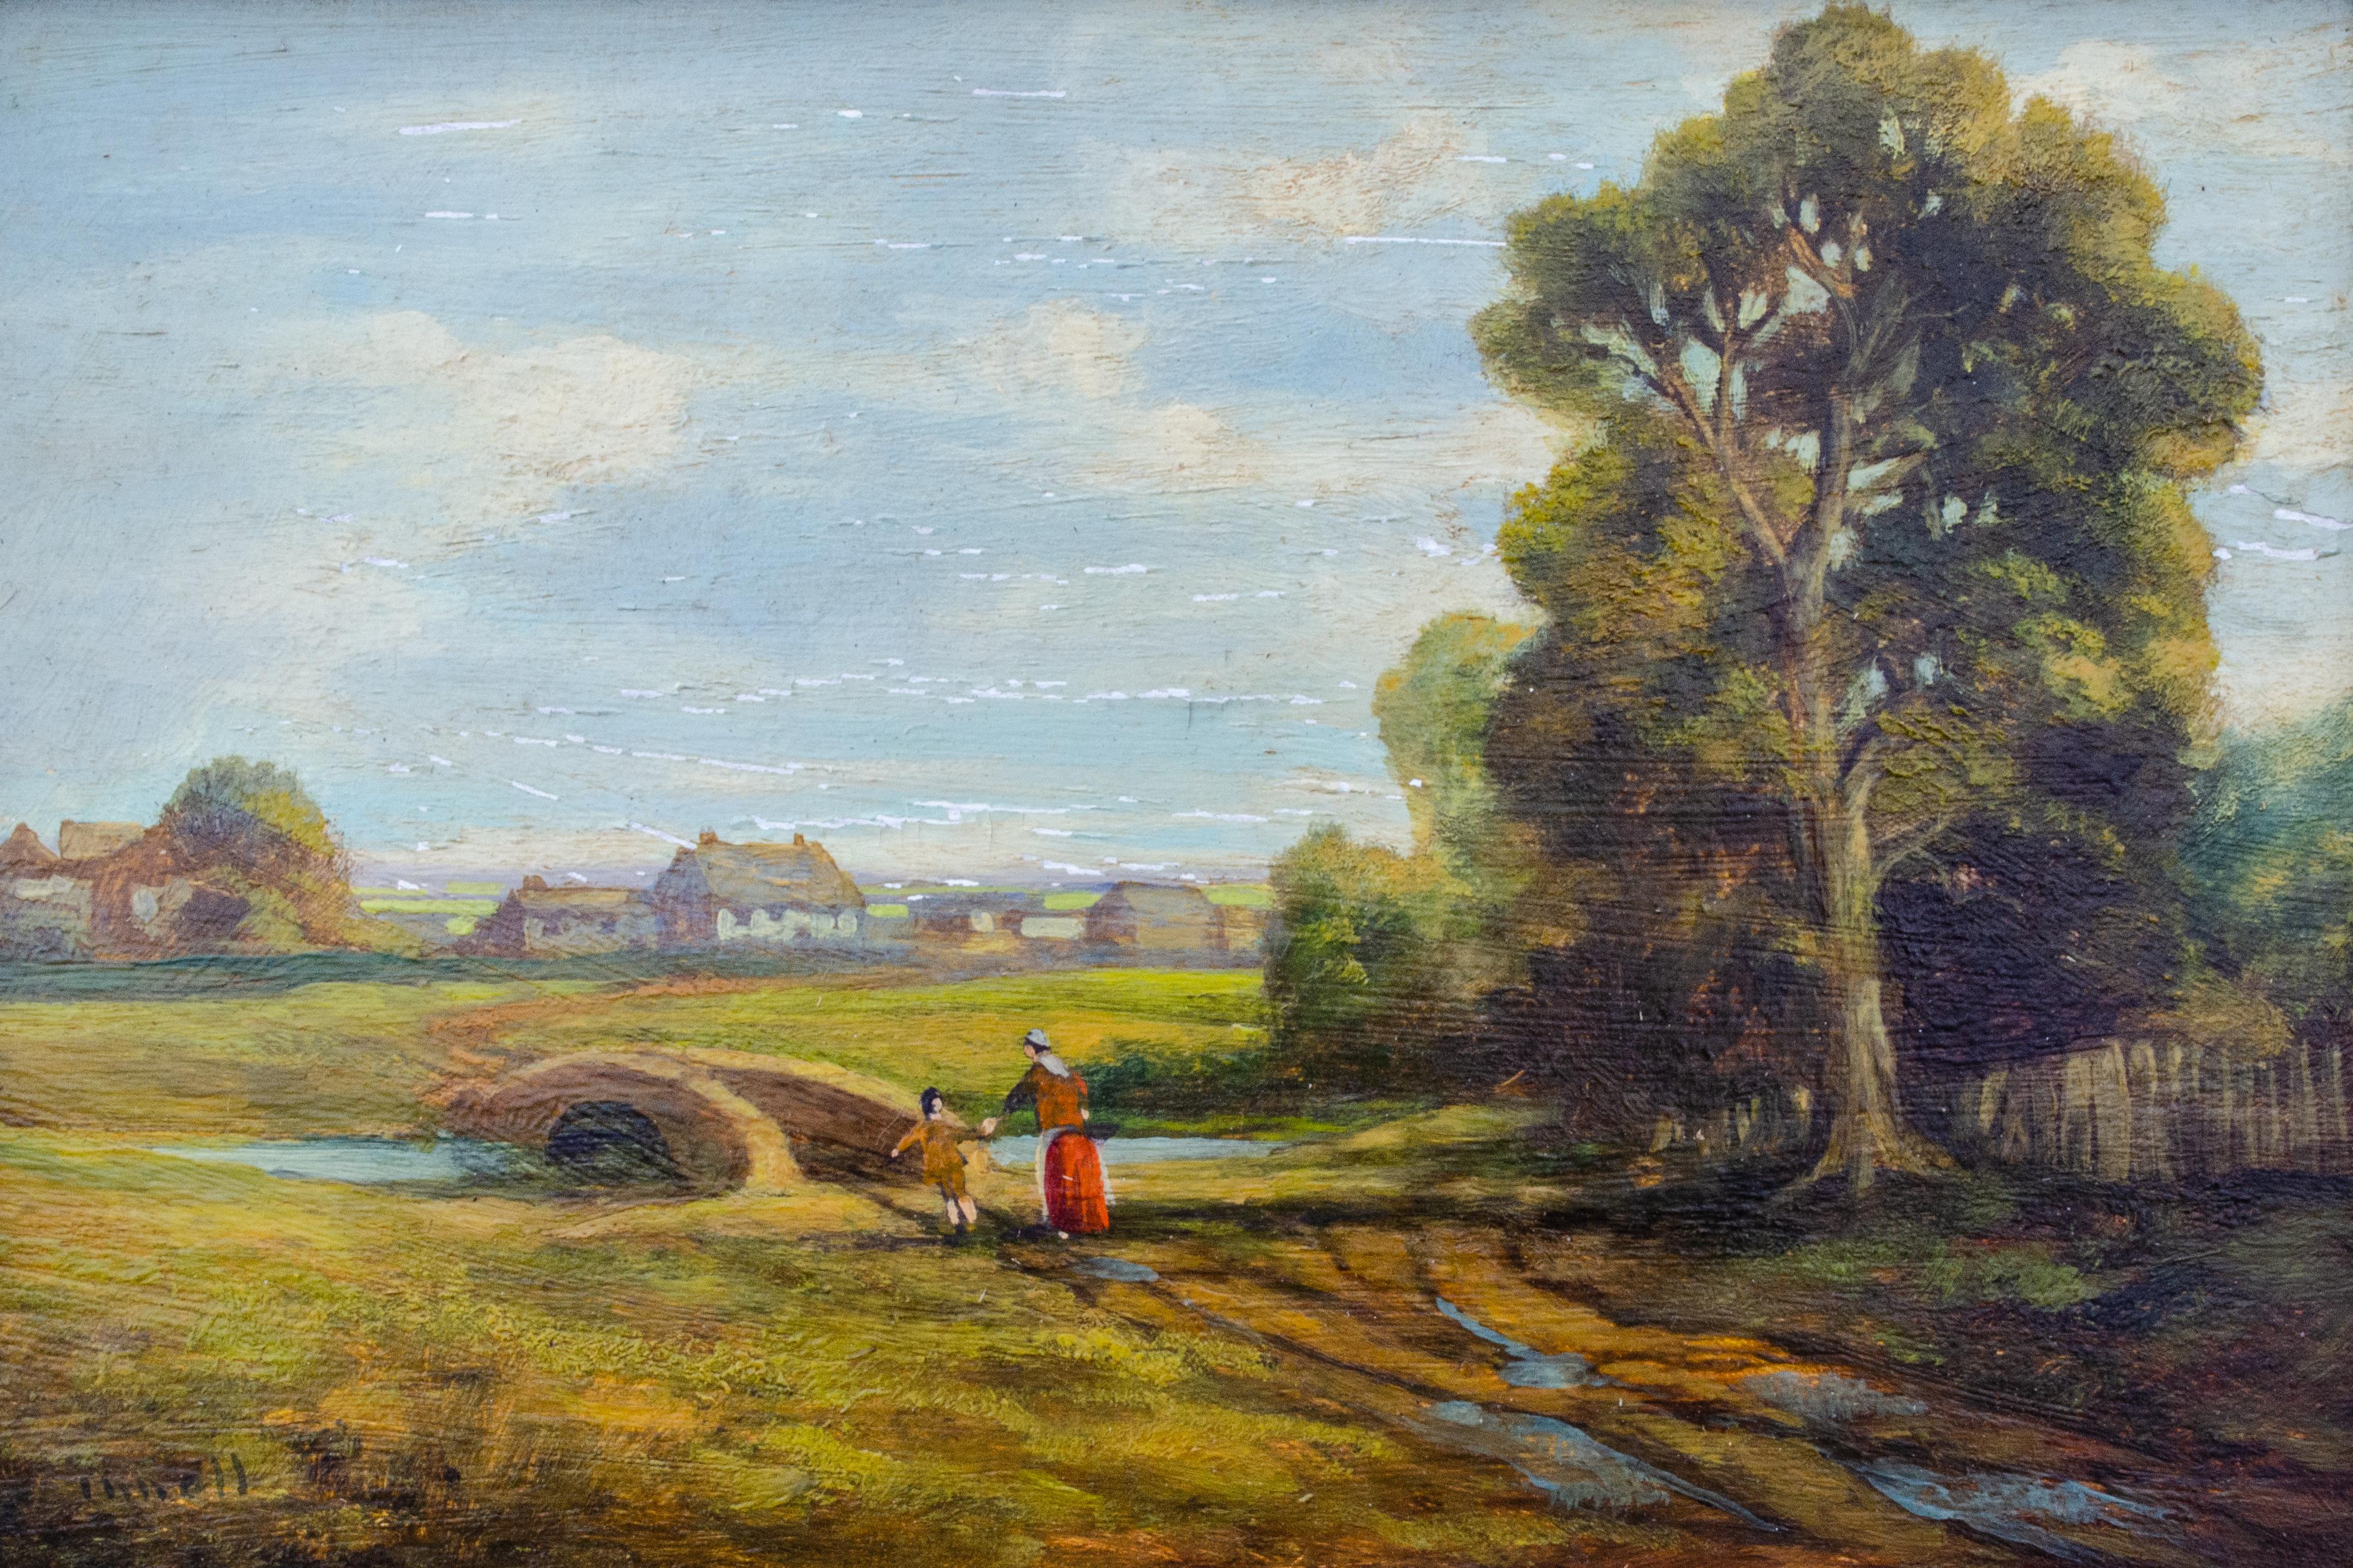 John Linnell (British, 1792-1882)
Untitled (English Countryside), 19th Century
Oil on wood panel
9 1/2 x 6 3/4 in.
Framed: 12 x 14 1/2 x 2 in.
Signed lower left: Linnell

John Linnell (June 16, 1792 - January 20, 1882) was an English landscape and